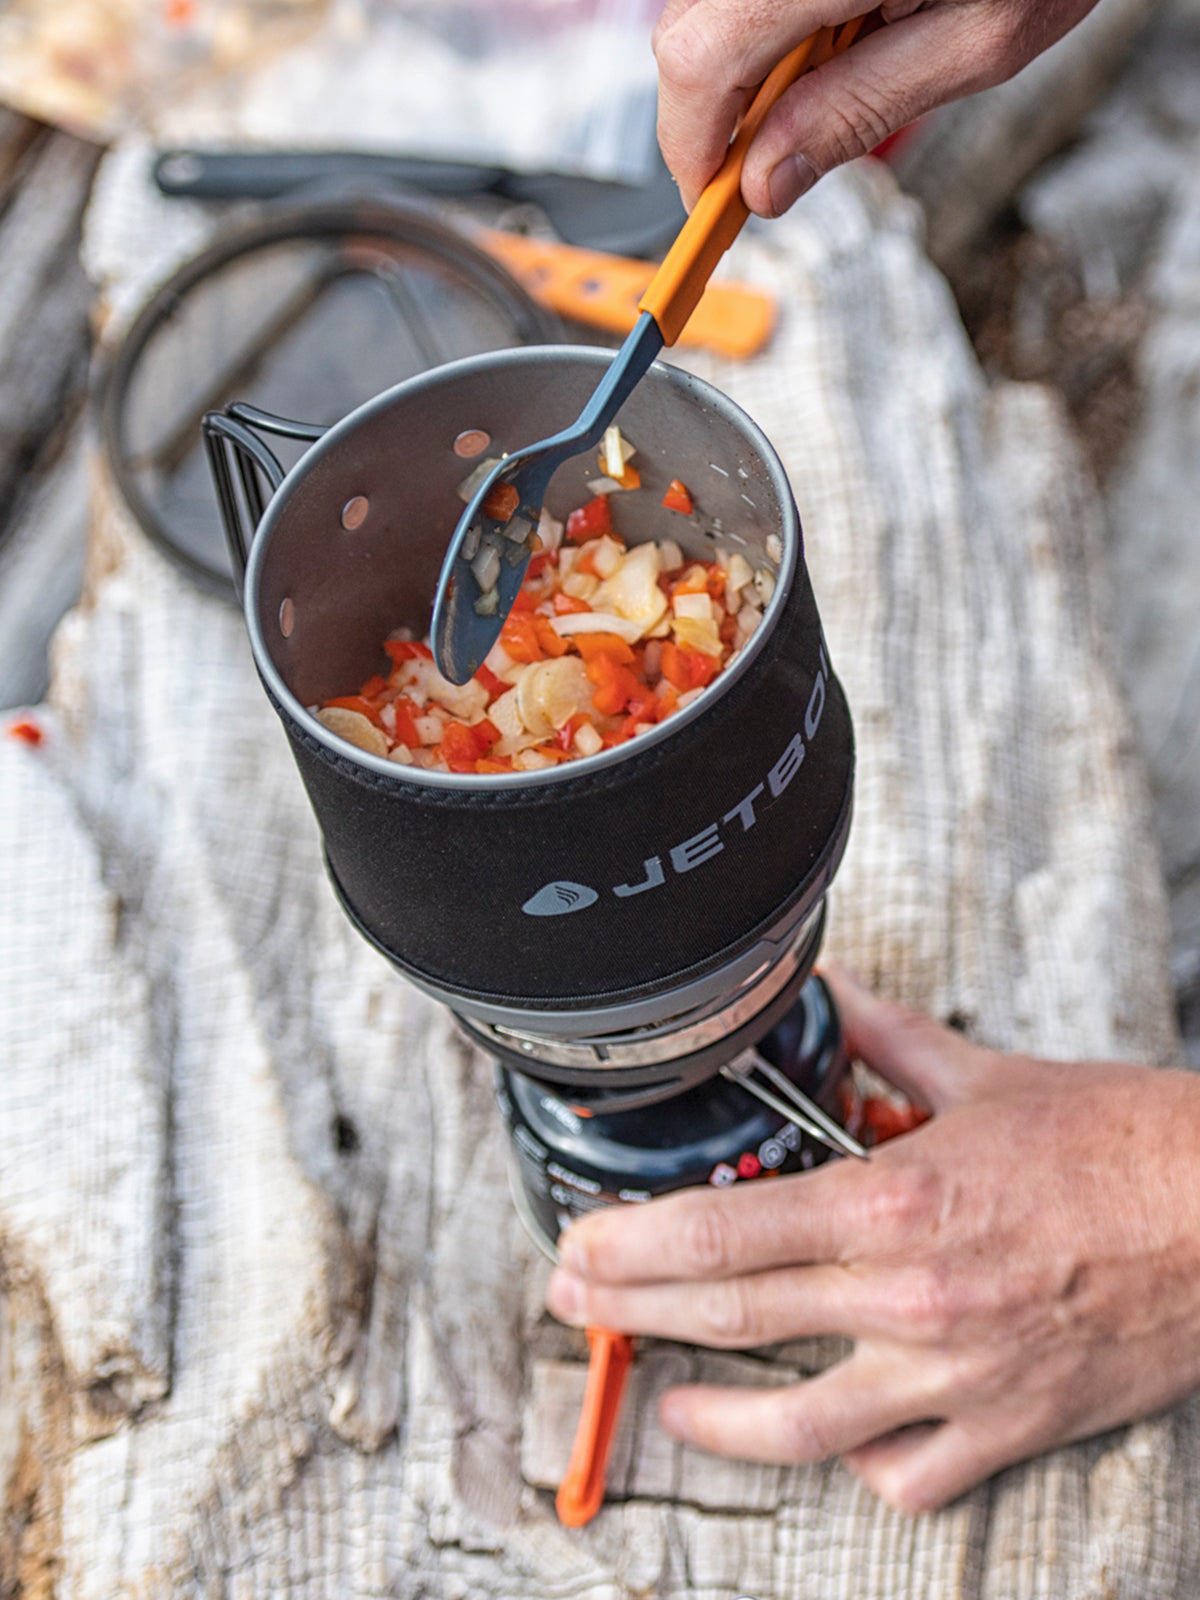 Jetboil MINIMO Cooking System being used to cook